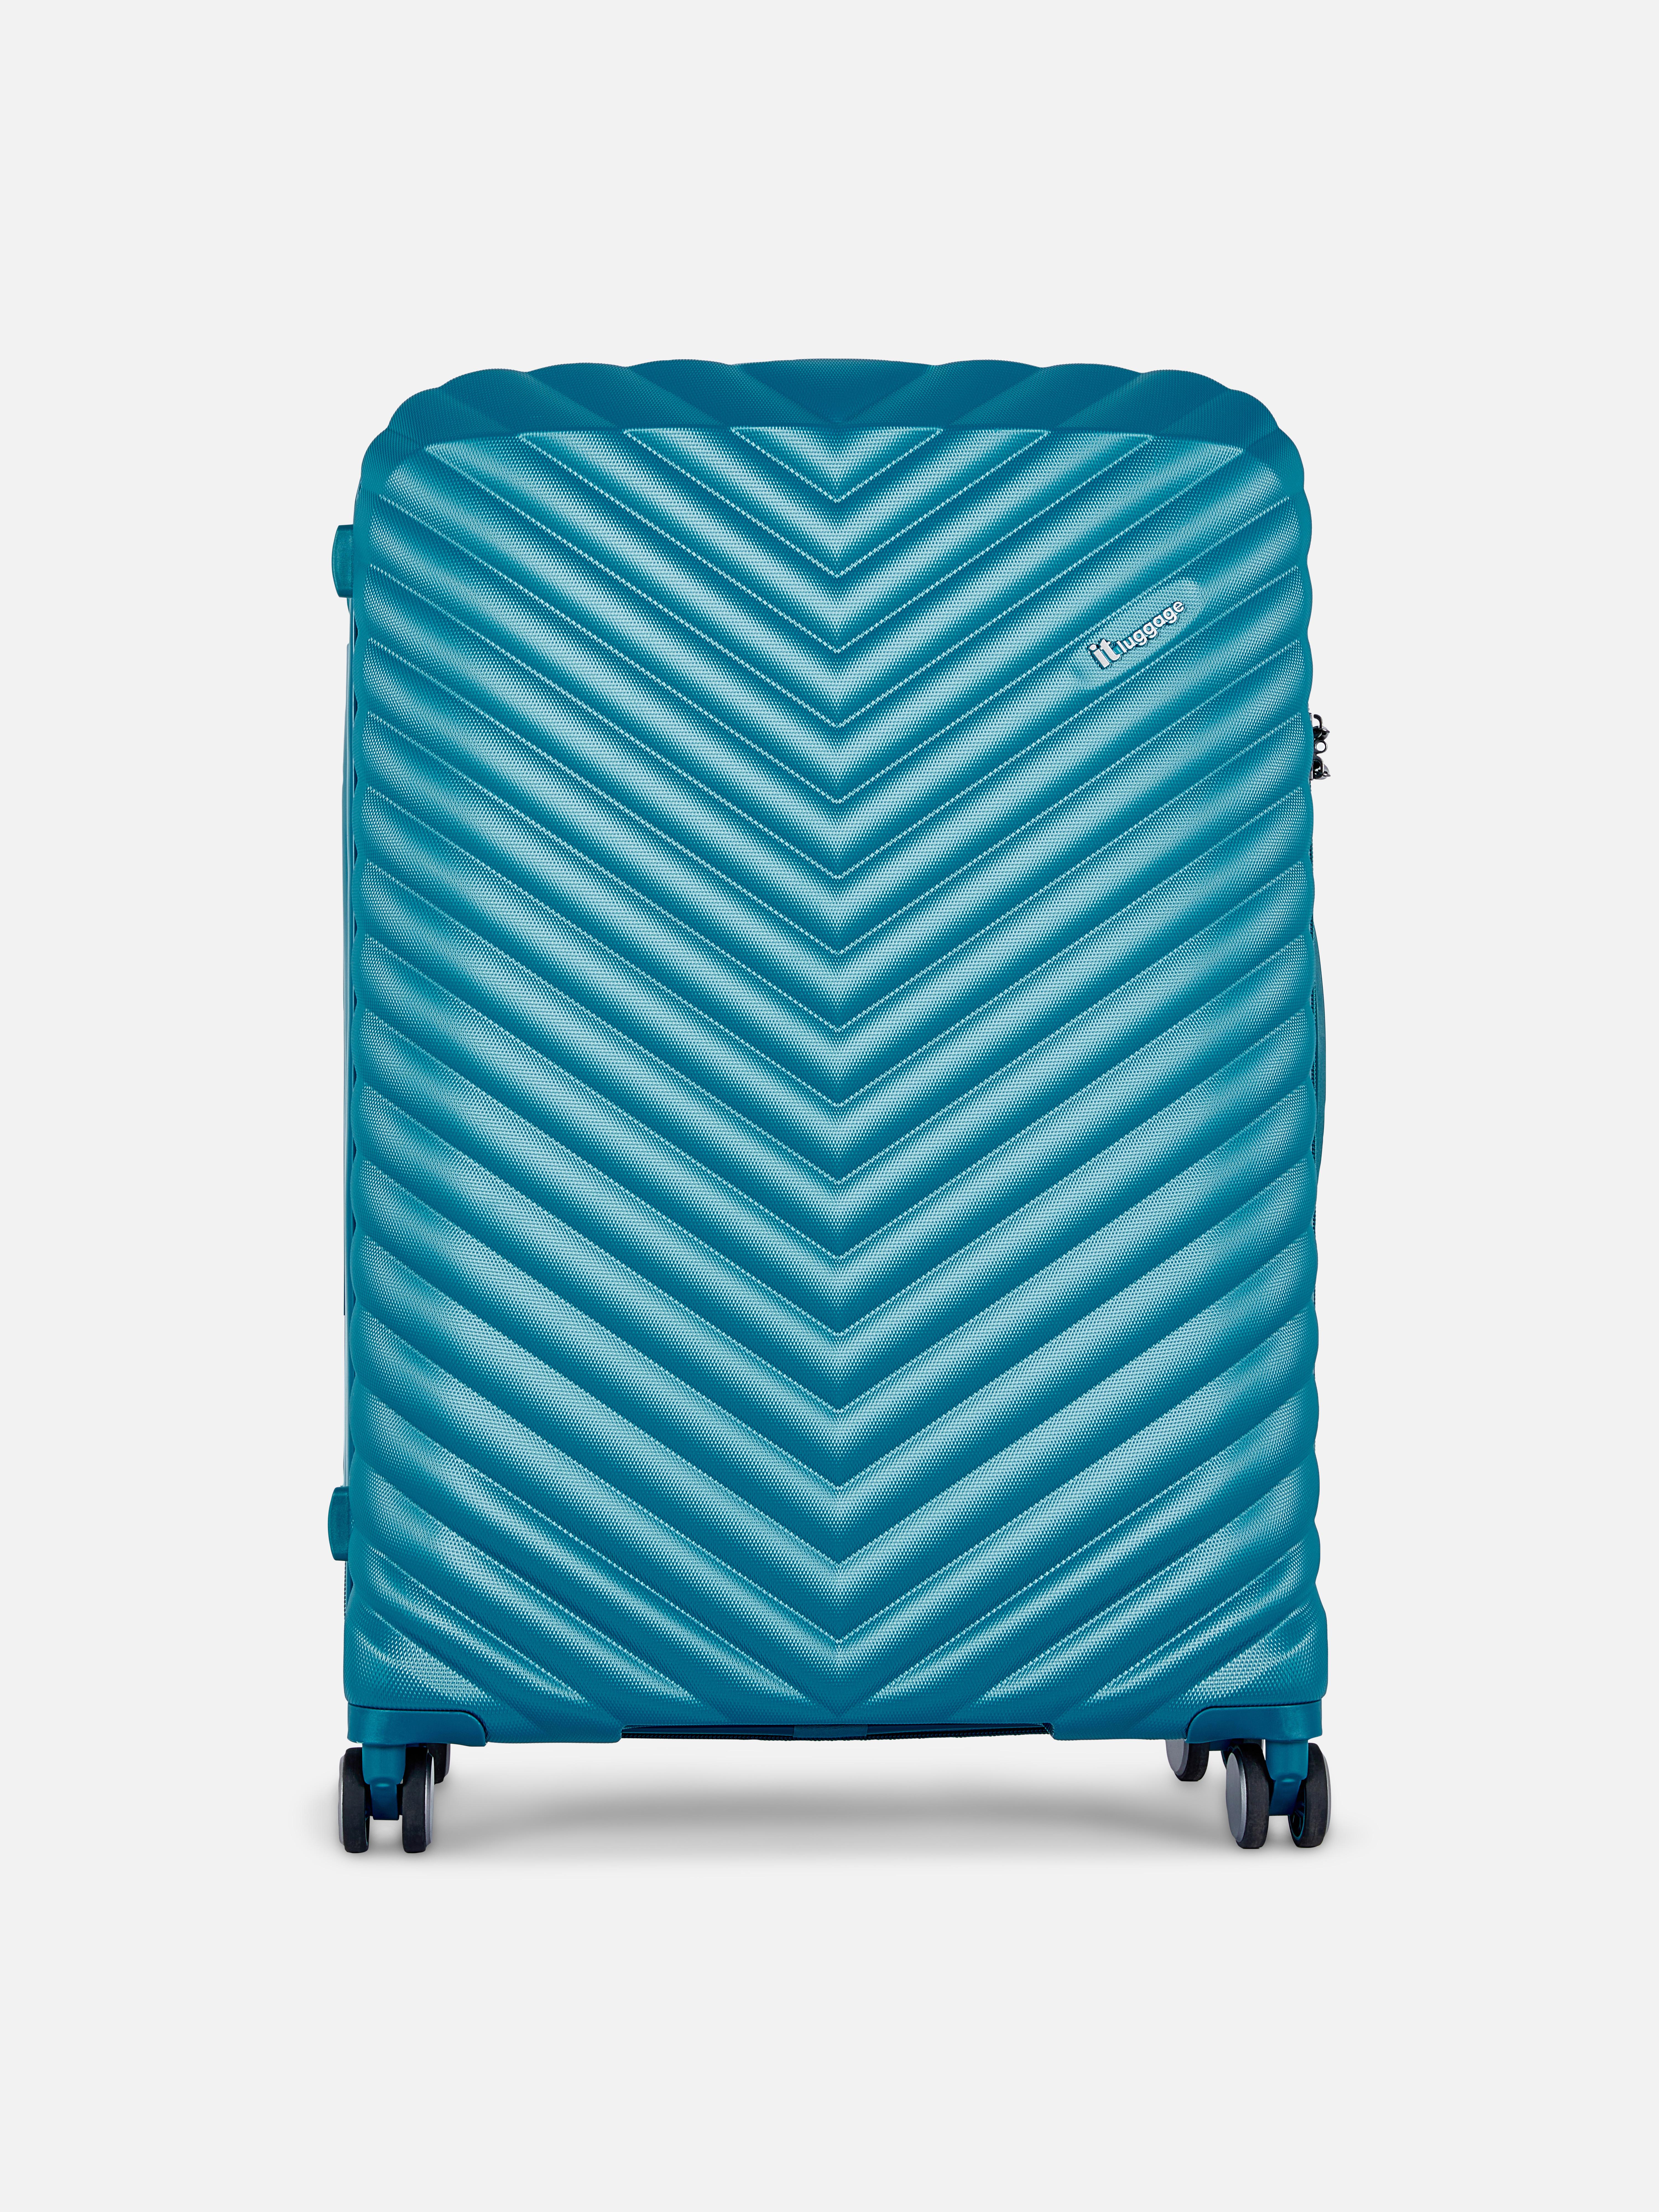 it Luggage Hard Shell Suitcase Teal